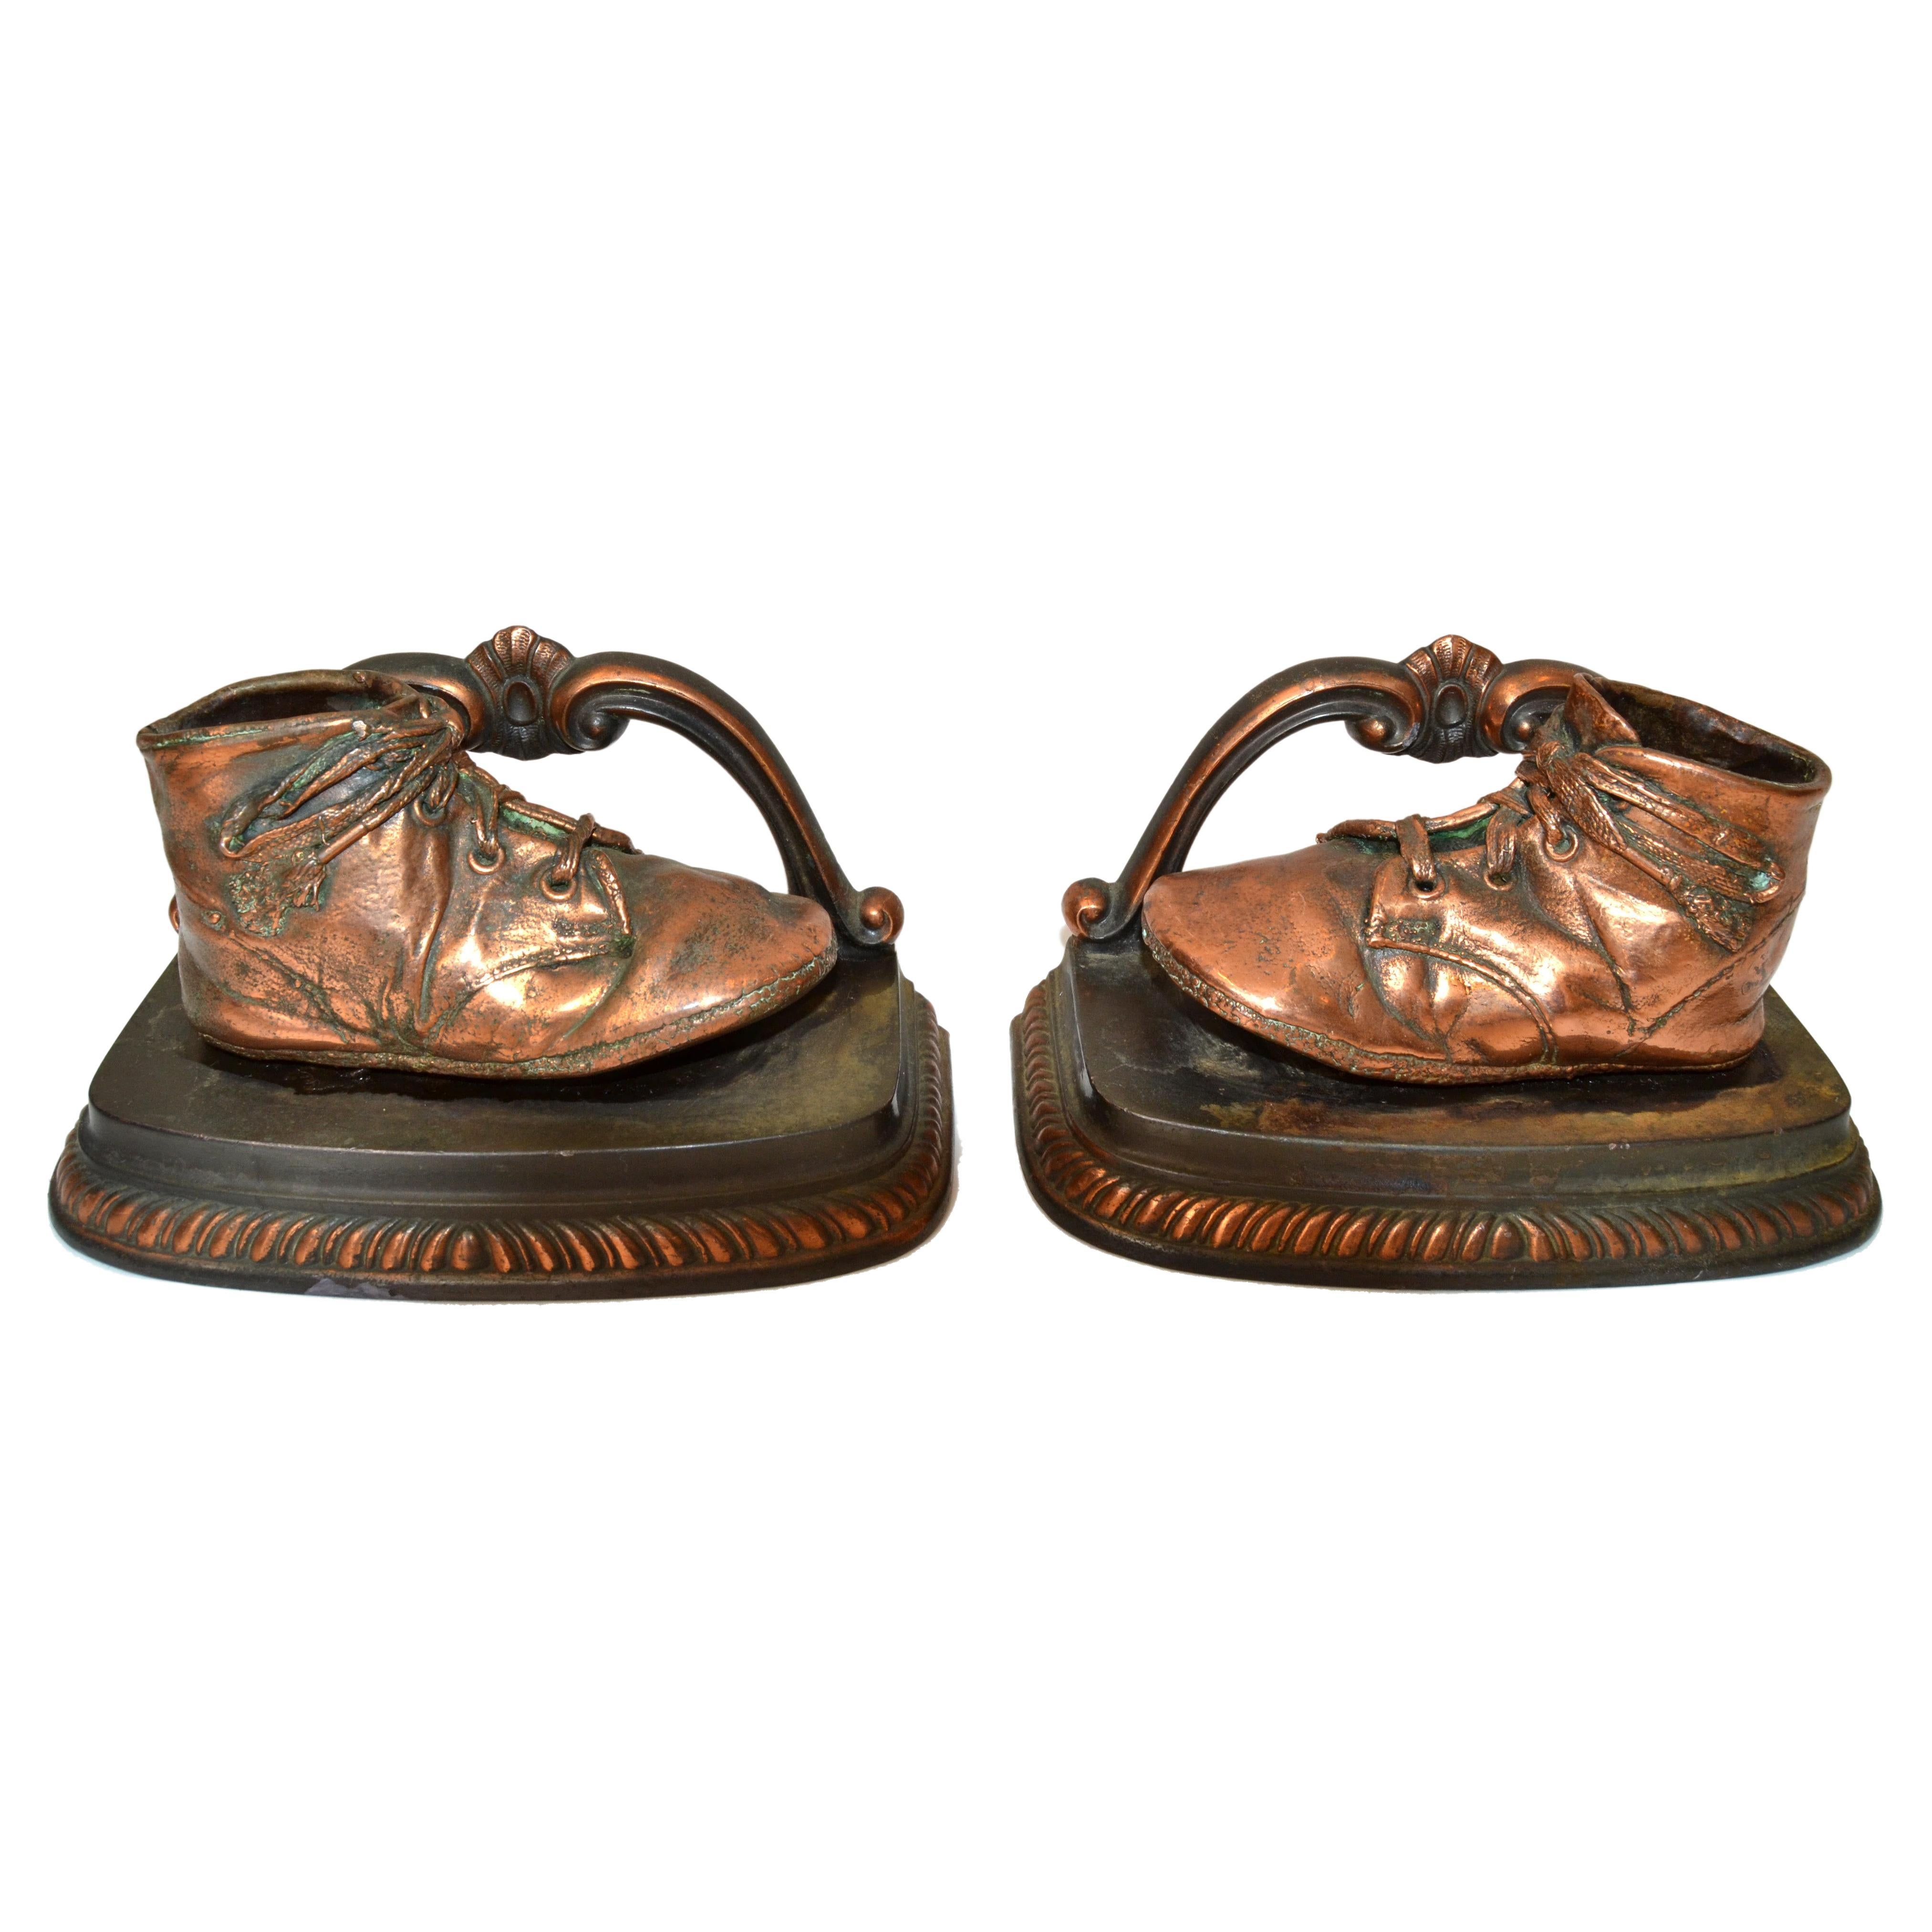 1960s English Traditional Bronze & Copper Baby Shoes Bookends Nursery Décor Pair